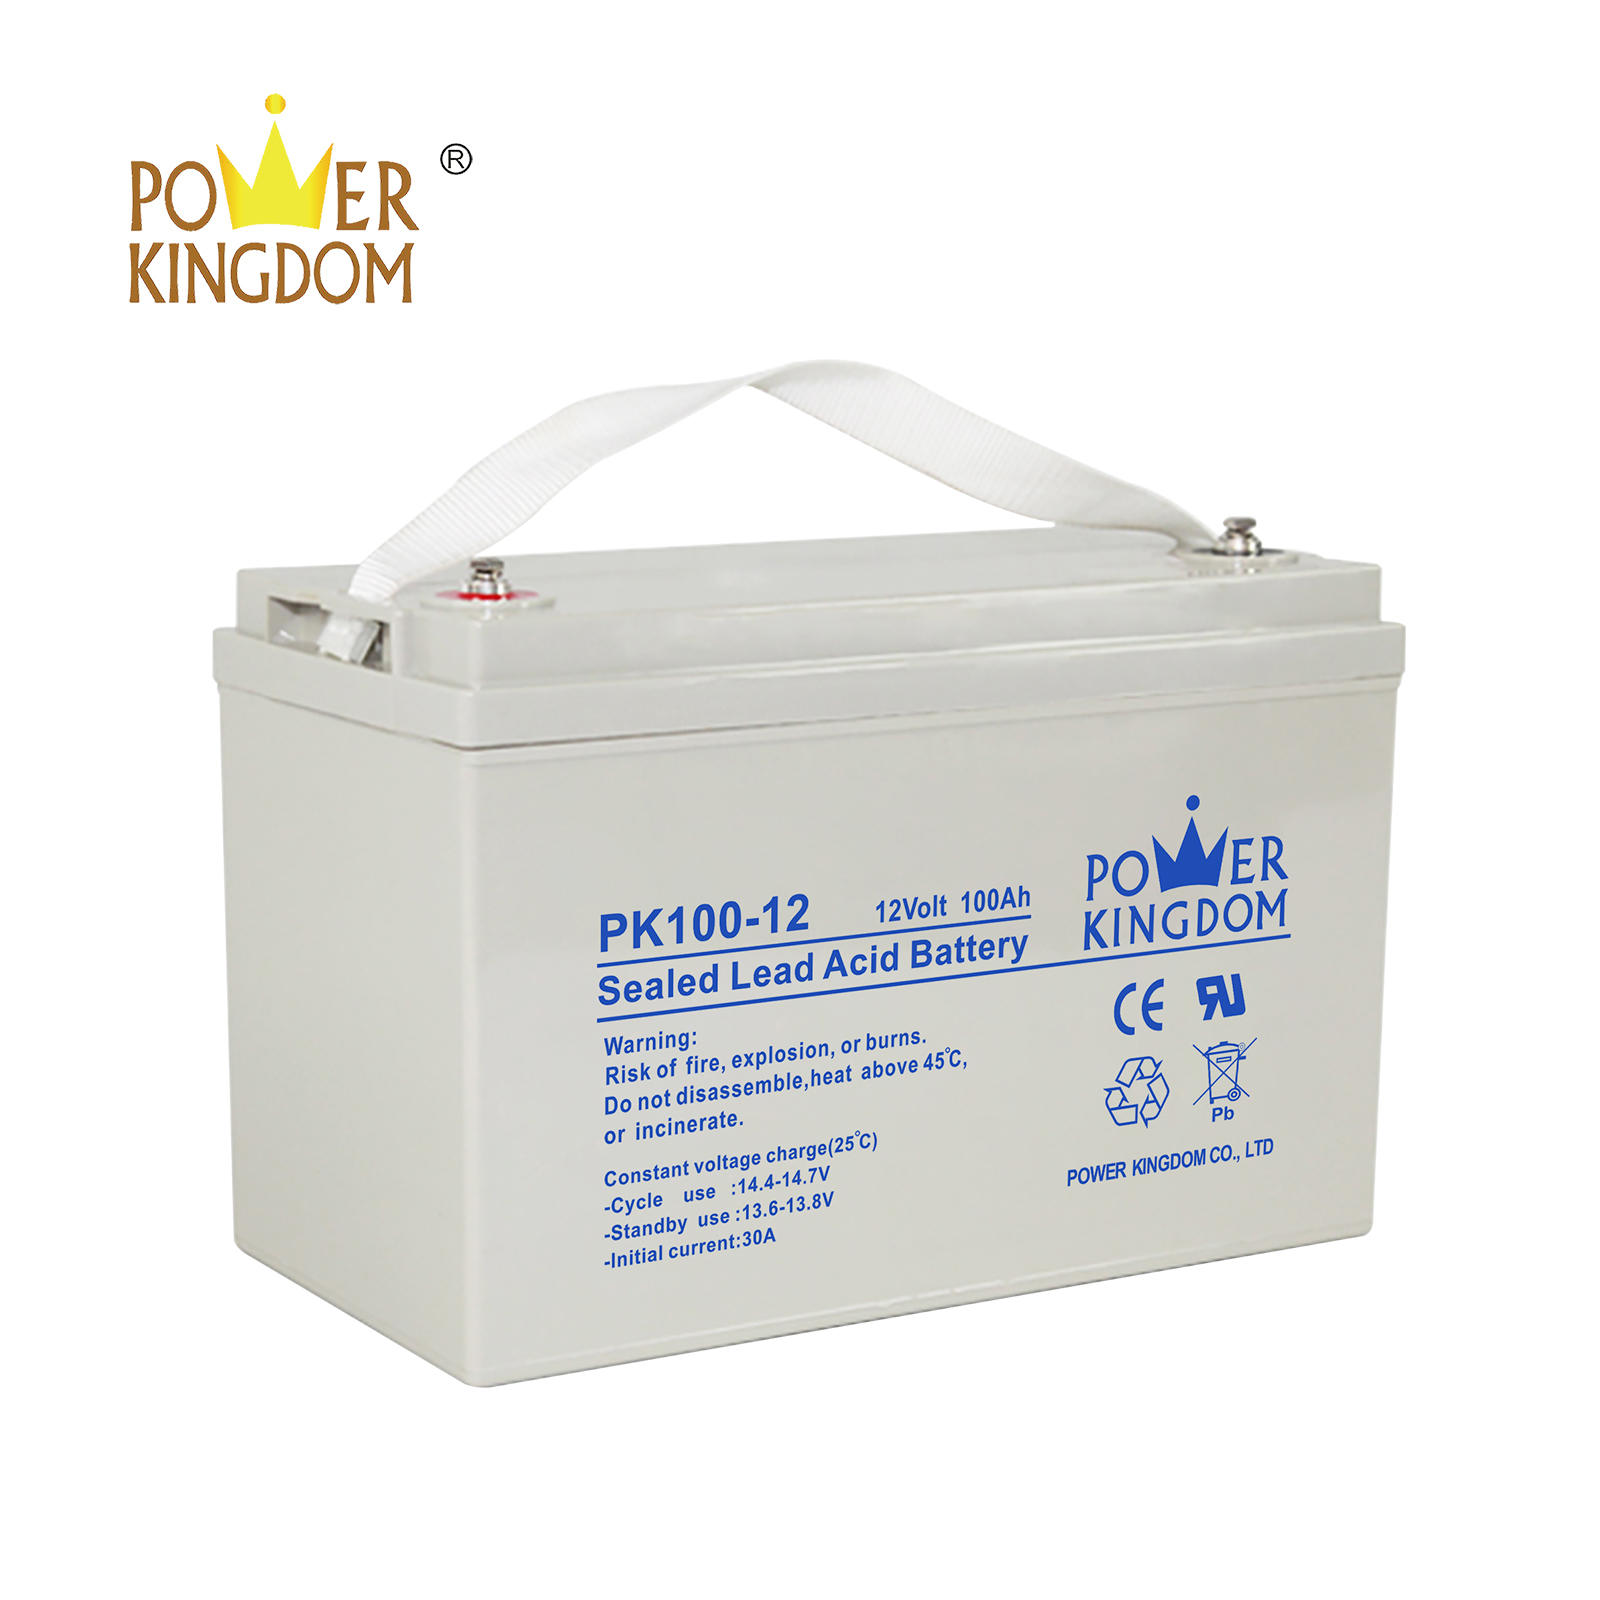 Power Kingdom no leakage design glass pack battery free quote solar and wind power system